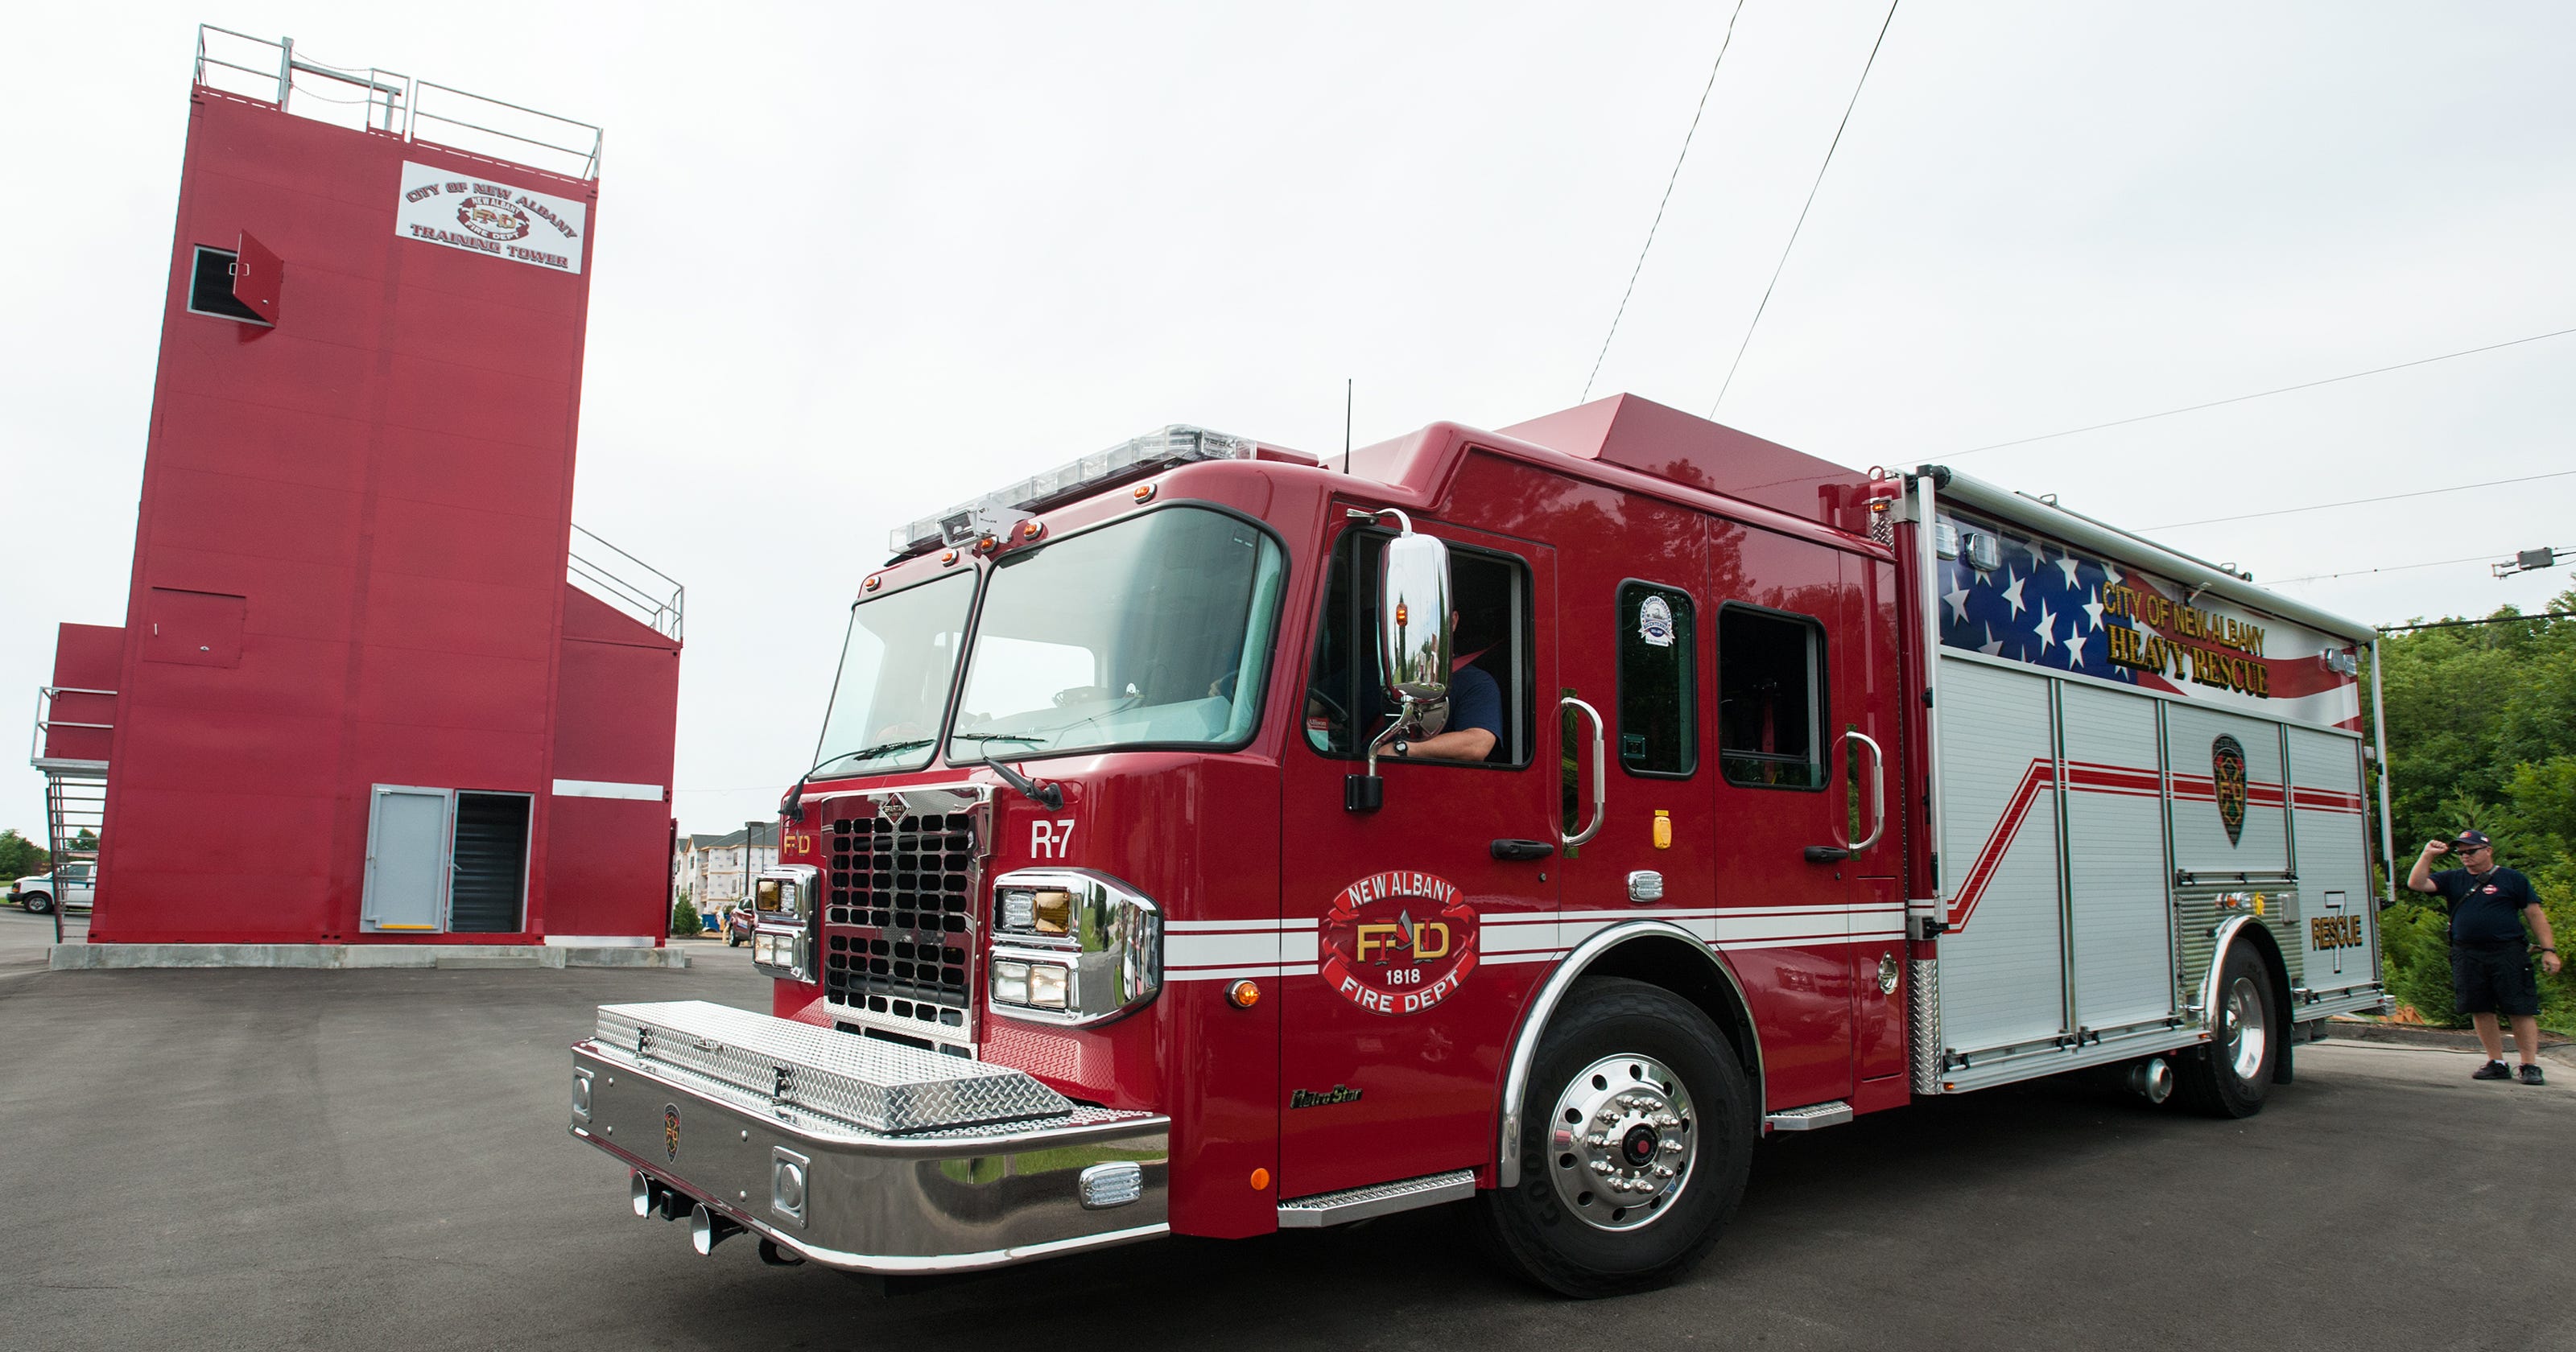 New Albany fire truck  purchase questioned